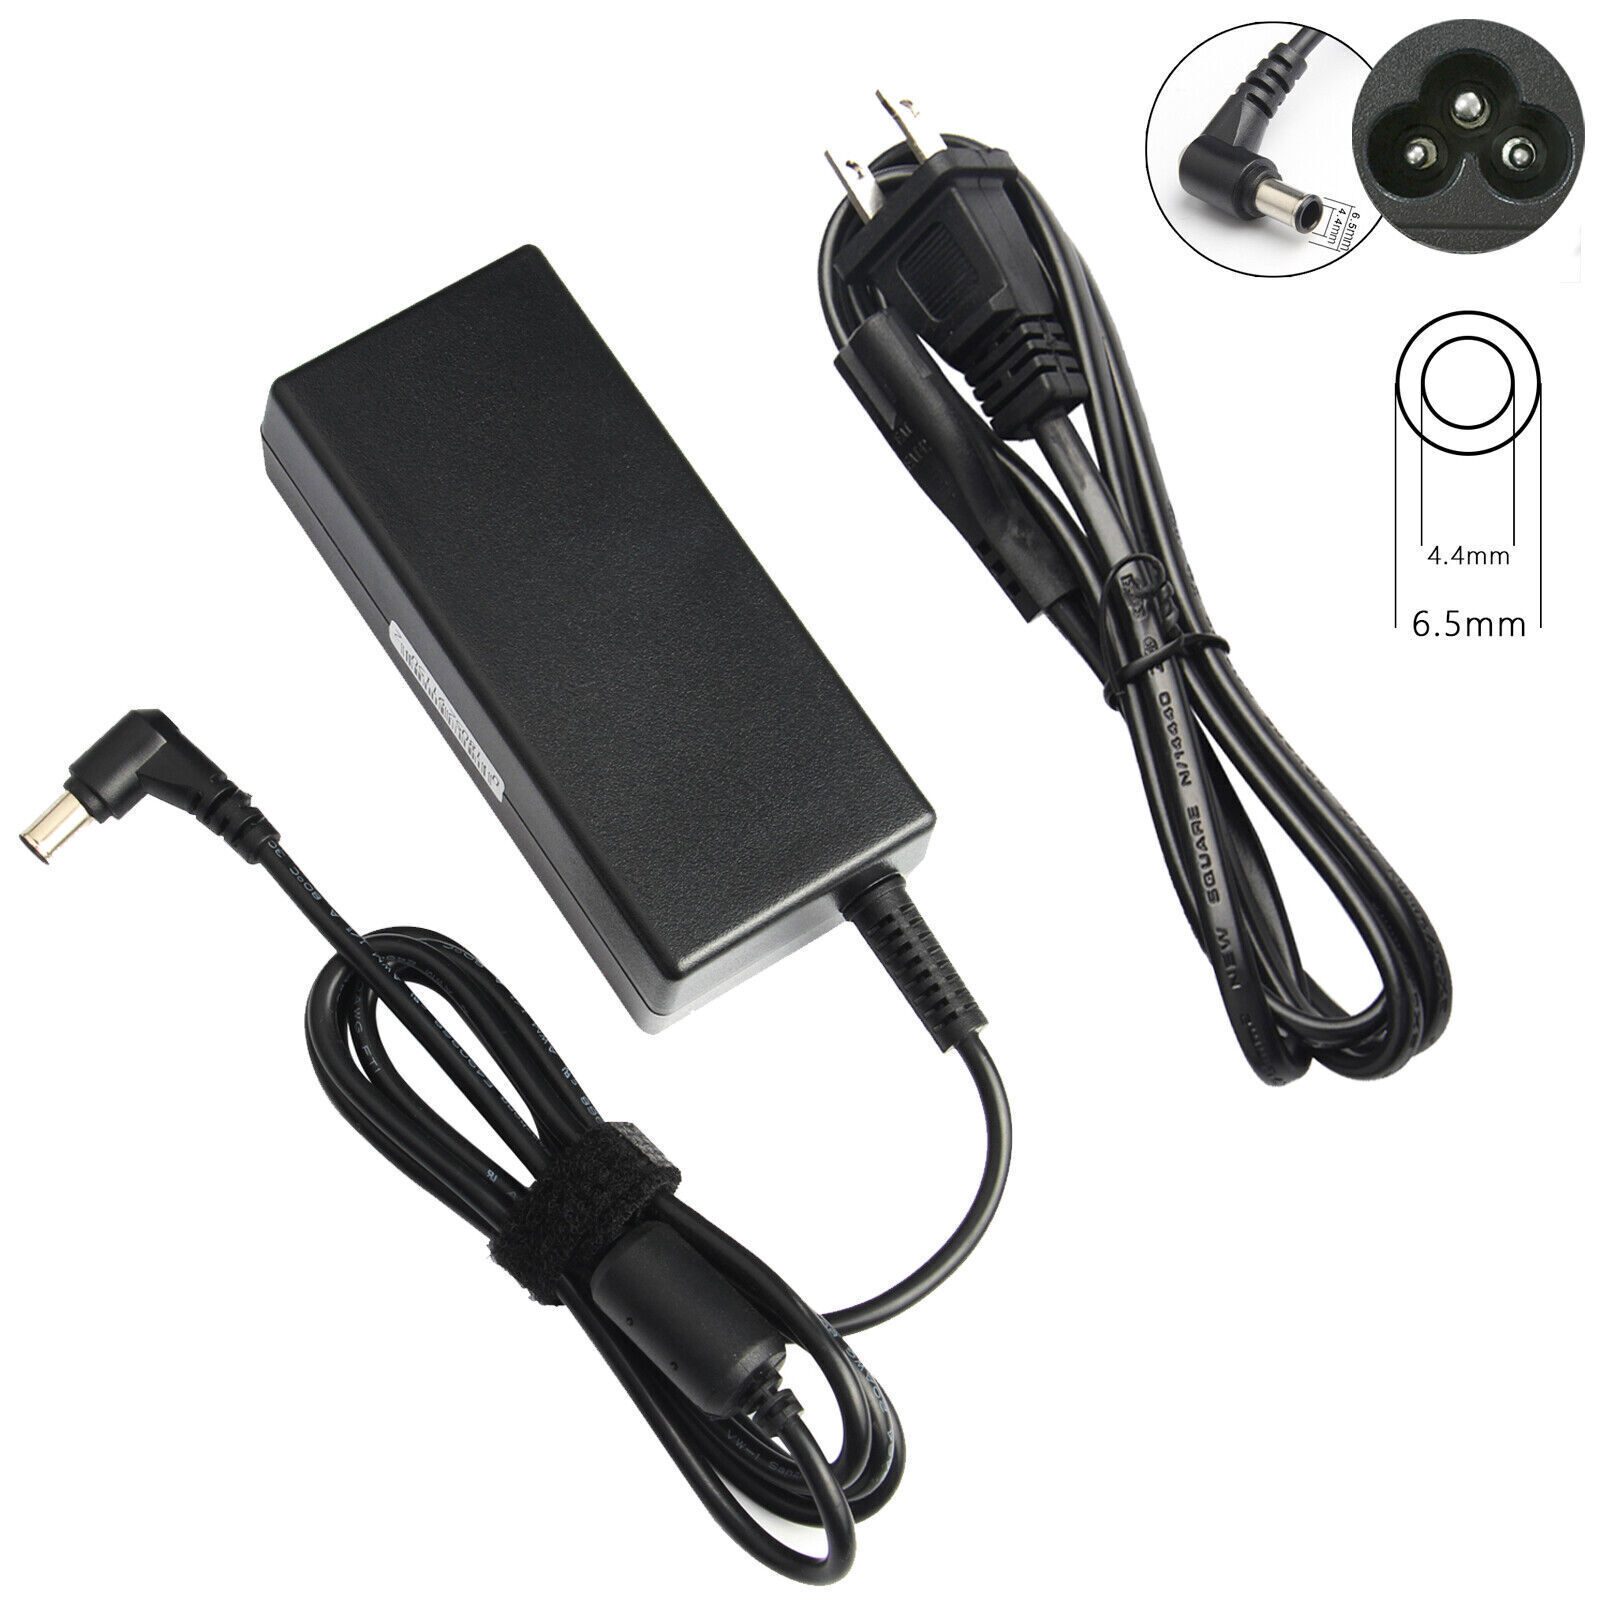 For CANON PIXMA IP100 PRINTER AC ADAPTER POWER CORD BATTERY CHARGER 16V 4A